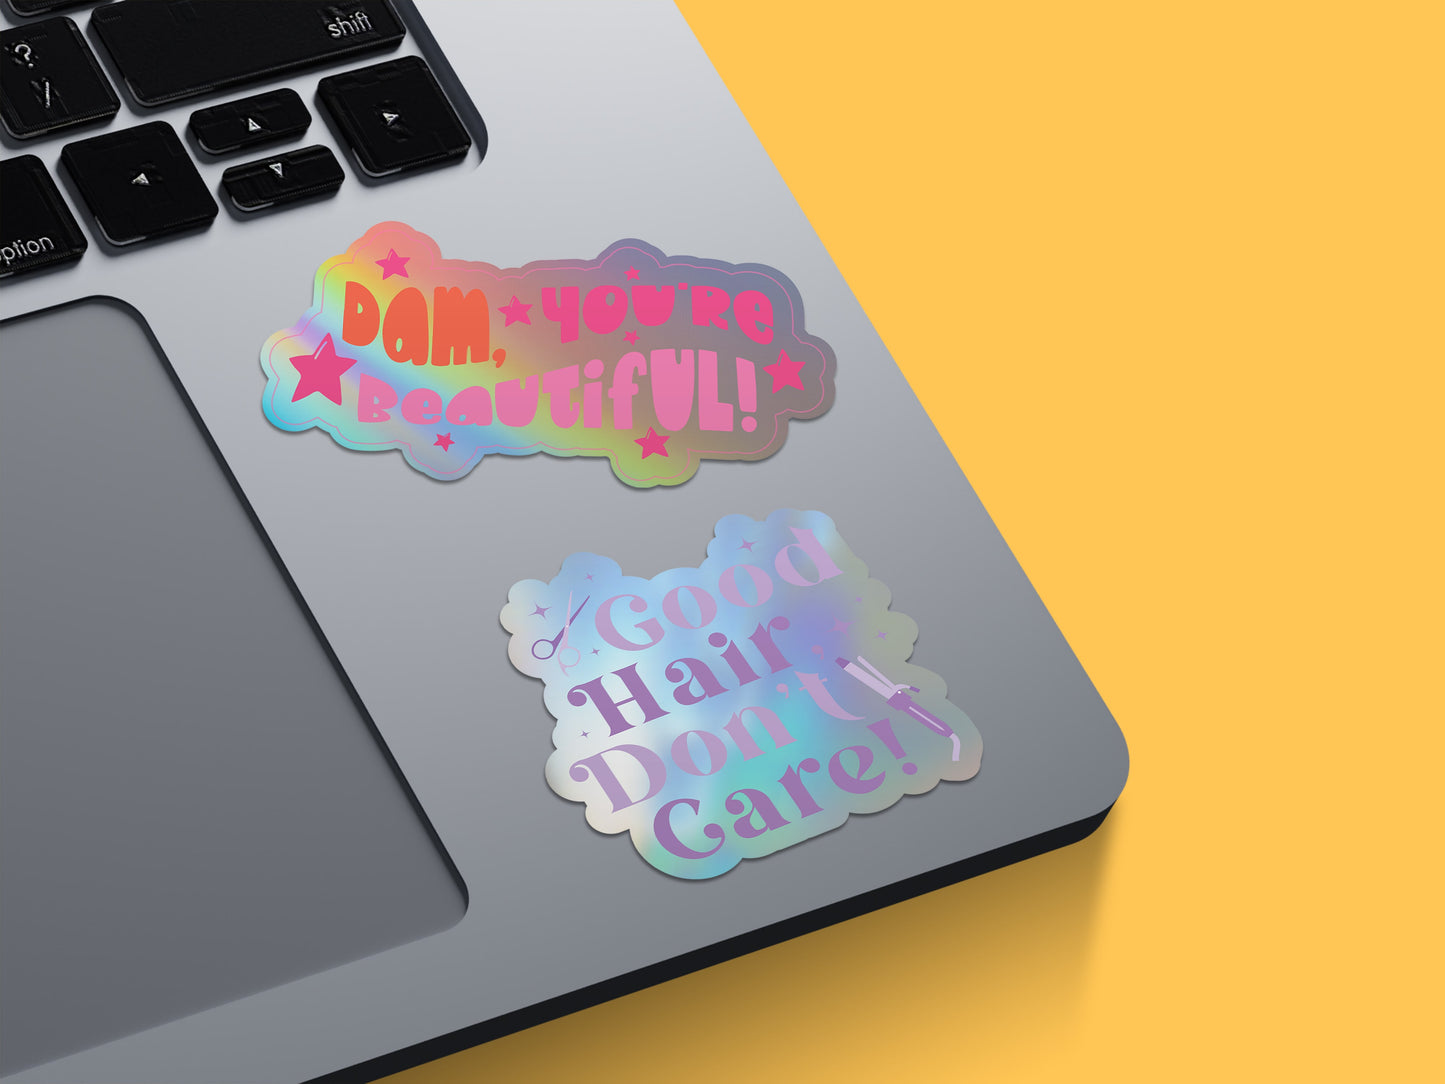 Good Hair, Don't Care Sticker (Holographic)